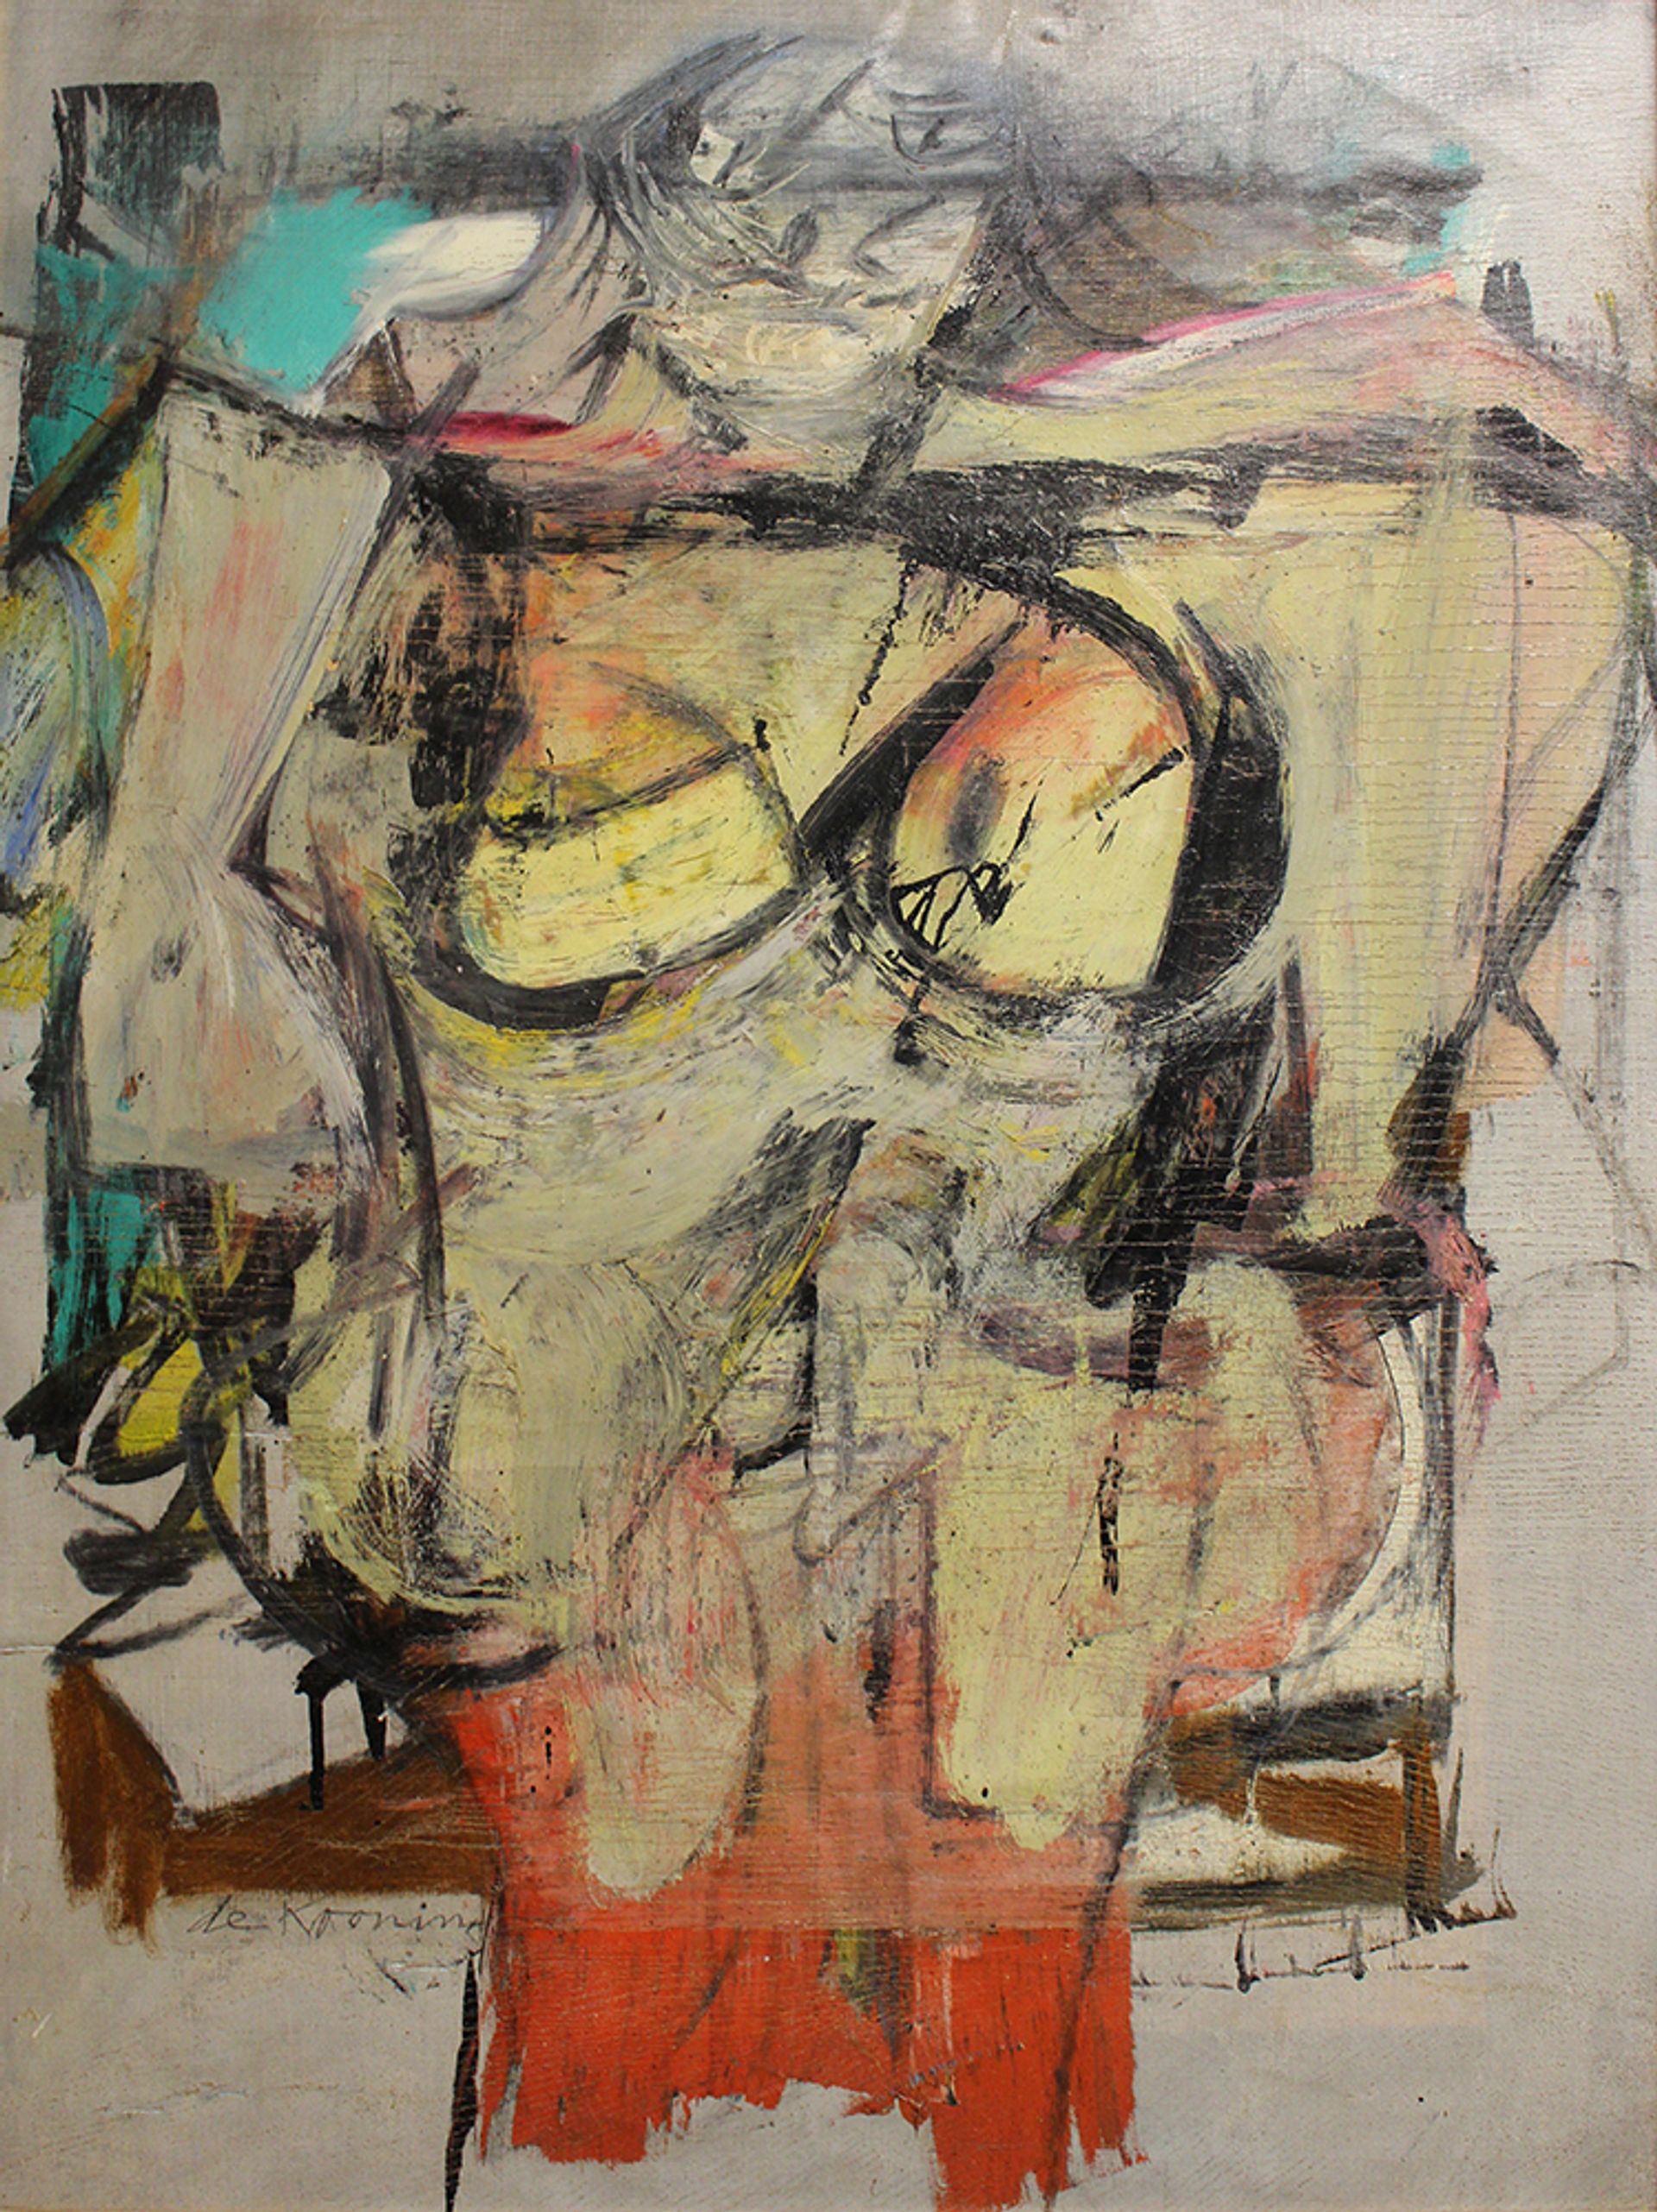 Willem de Kooning’s Woman-Ochre  (1955) in August 2017, shortly after it was recovered in New Mexico and returned to the University of Arizona Museum of Art. © 2019 The Willem de Kooning Foundation / Artists Rights Society (ARS), New York